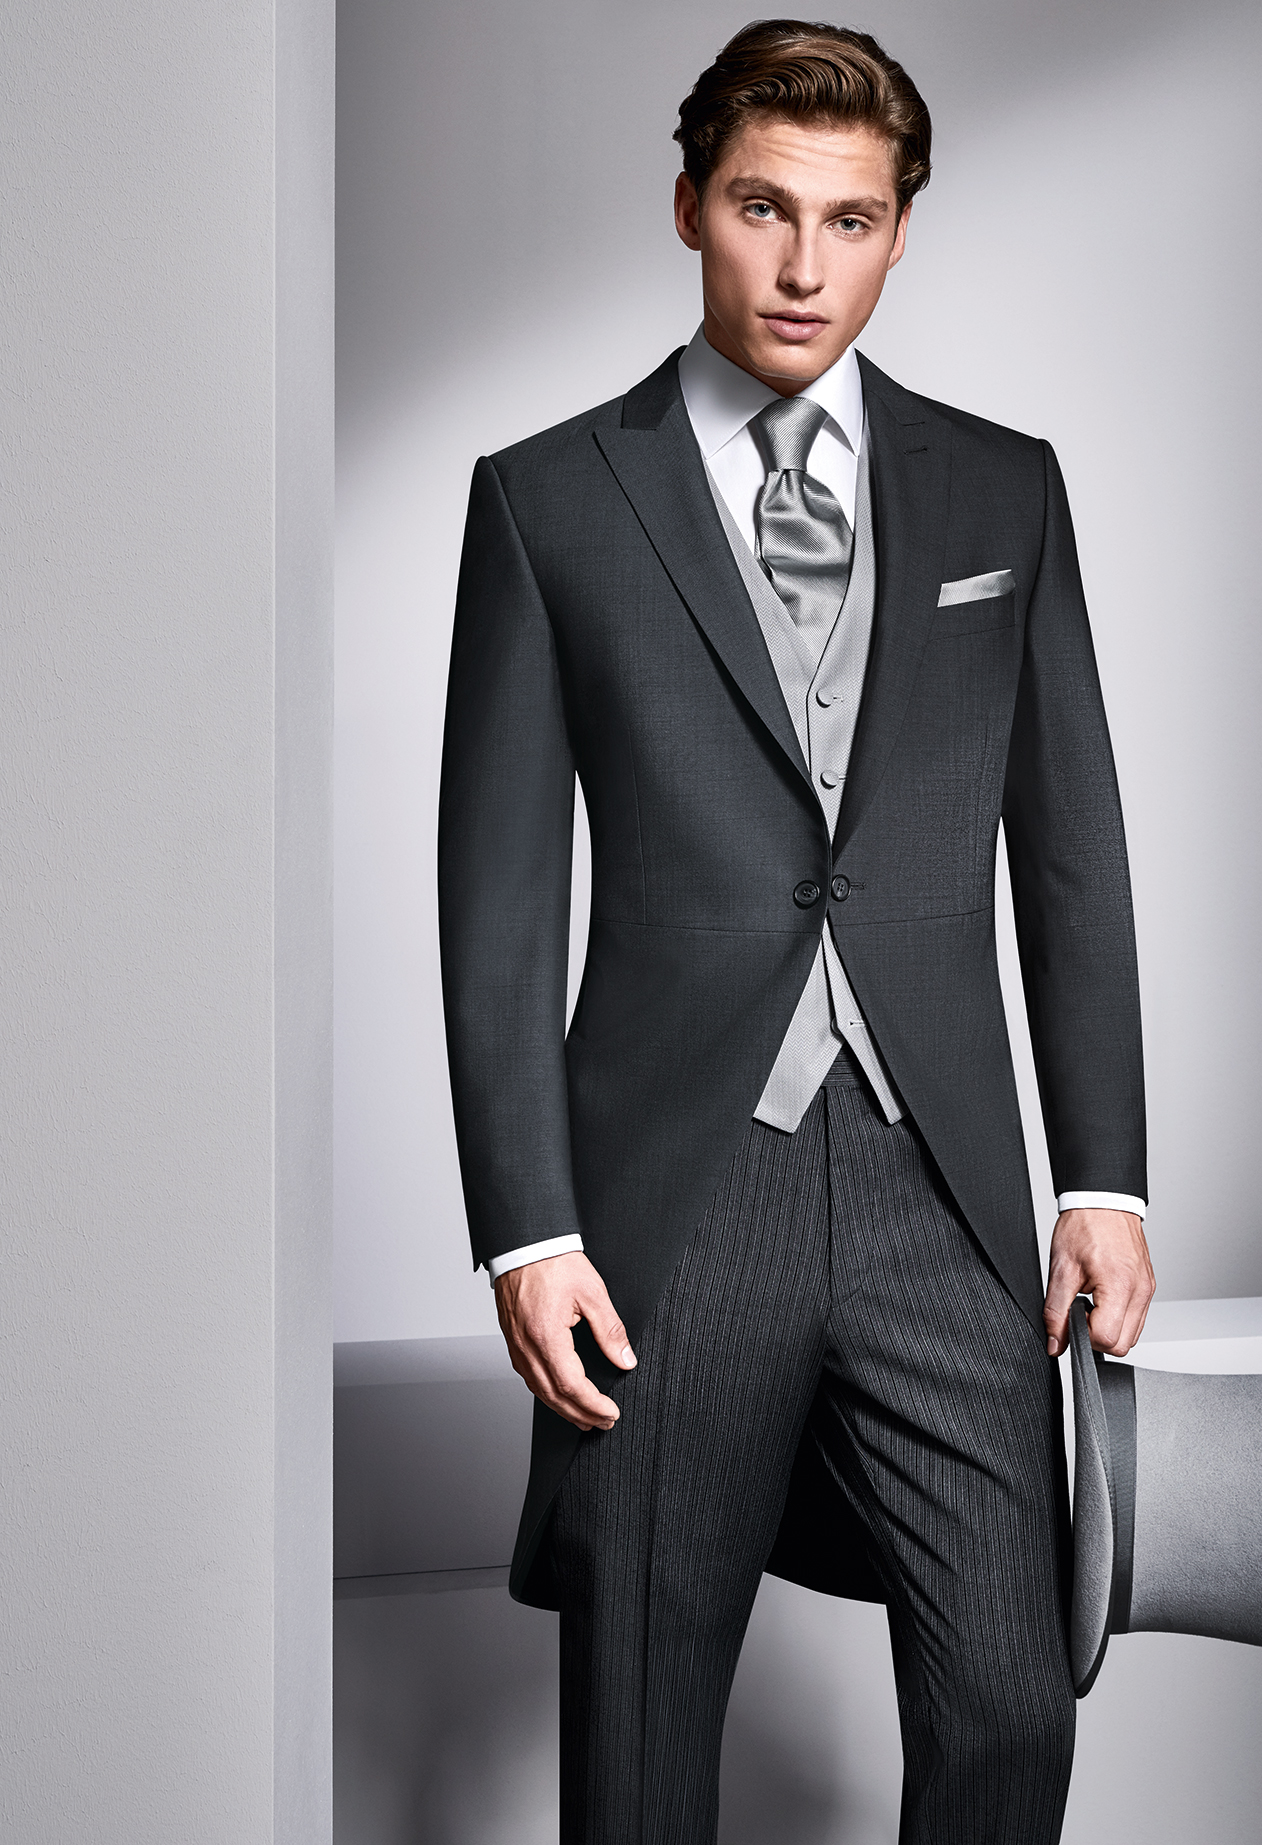 Evening Tail 3 Piece Suit - Tom Murphy's Formal and Menswear